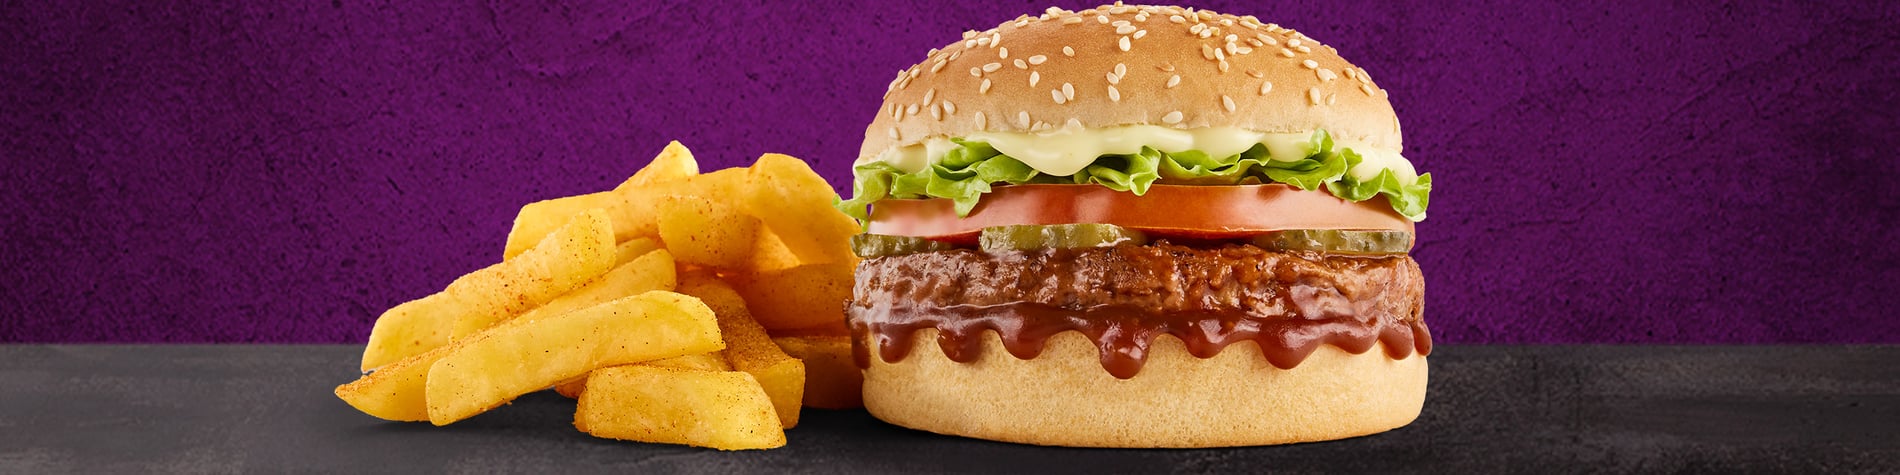 The NEW Mo’MjojoTM Burger Meal from Steers® Shell Plettenberg Bay. 2 Flame-Grilled pure beef patties, pineapple, macon, tomato, lettuce, and small Famous Hand-Cut Chips, on a purple background.